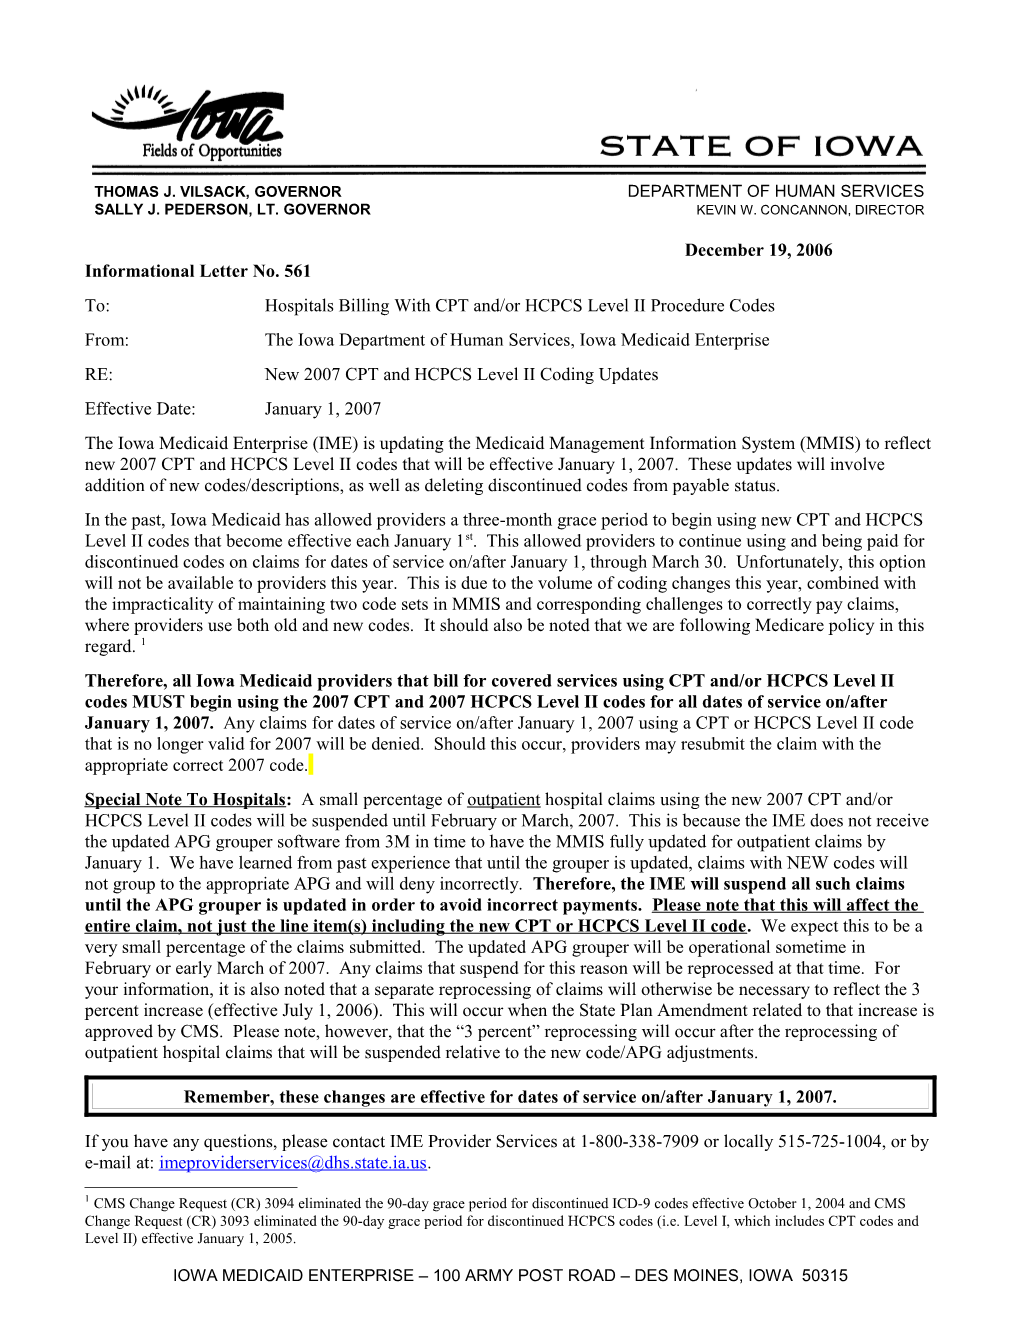 Department of Human Services Letterhead s4